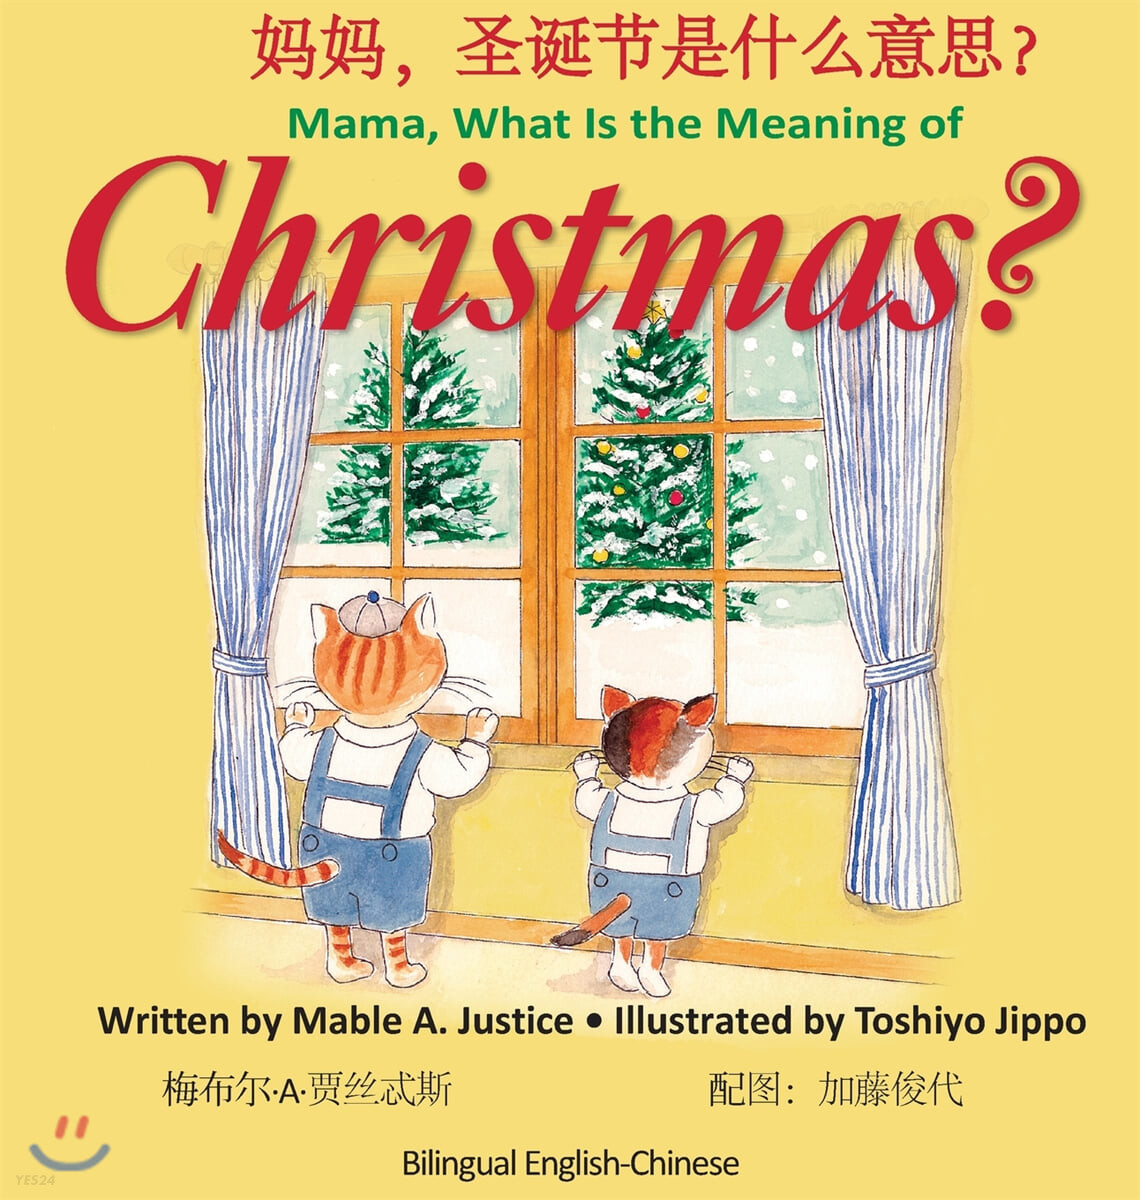 Mama, What is the meaning of Christmas?